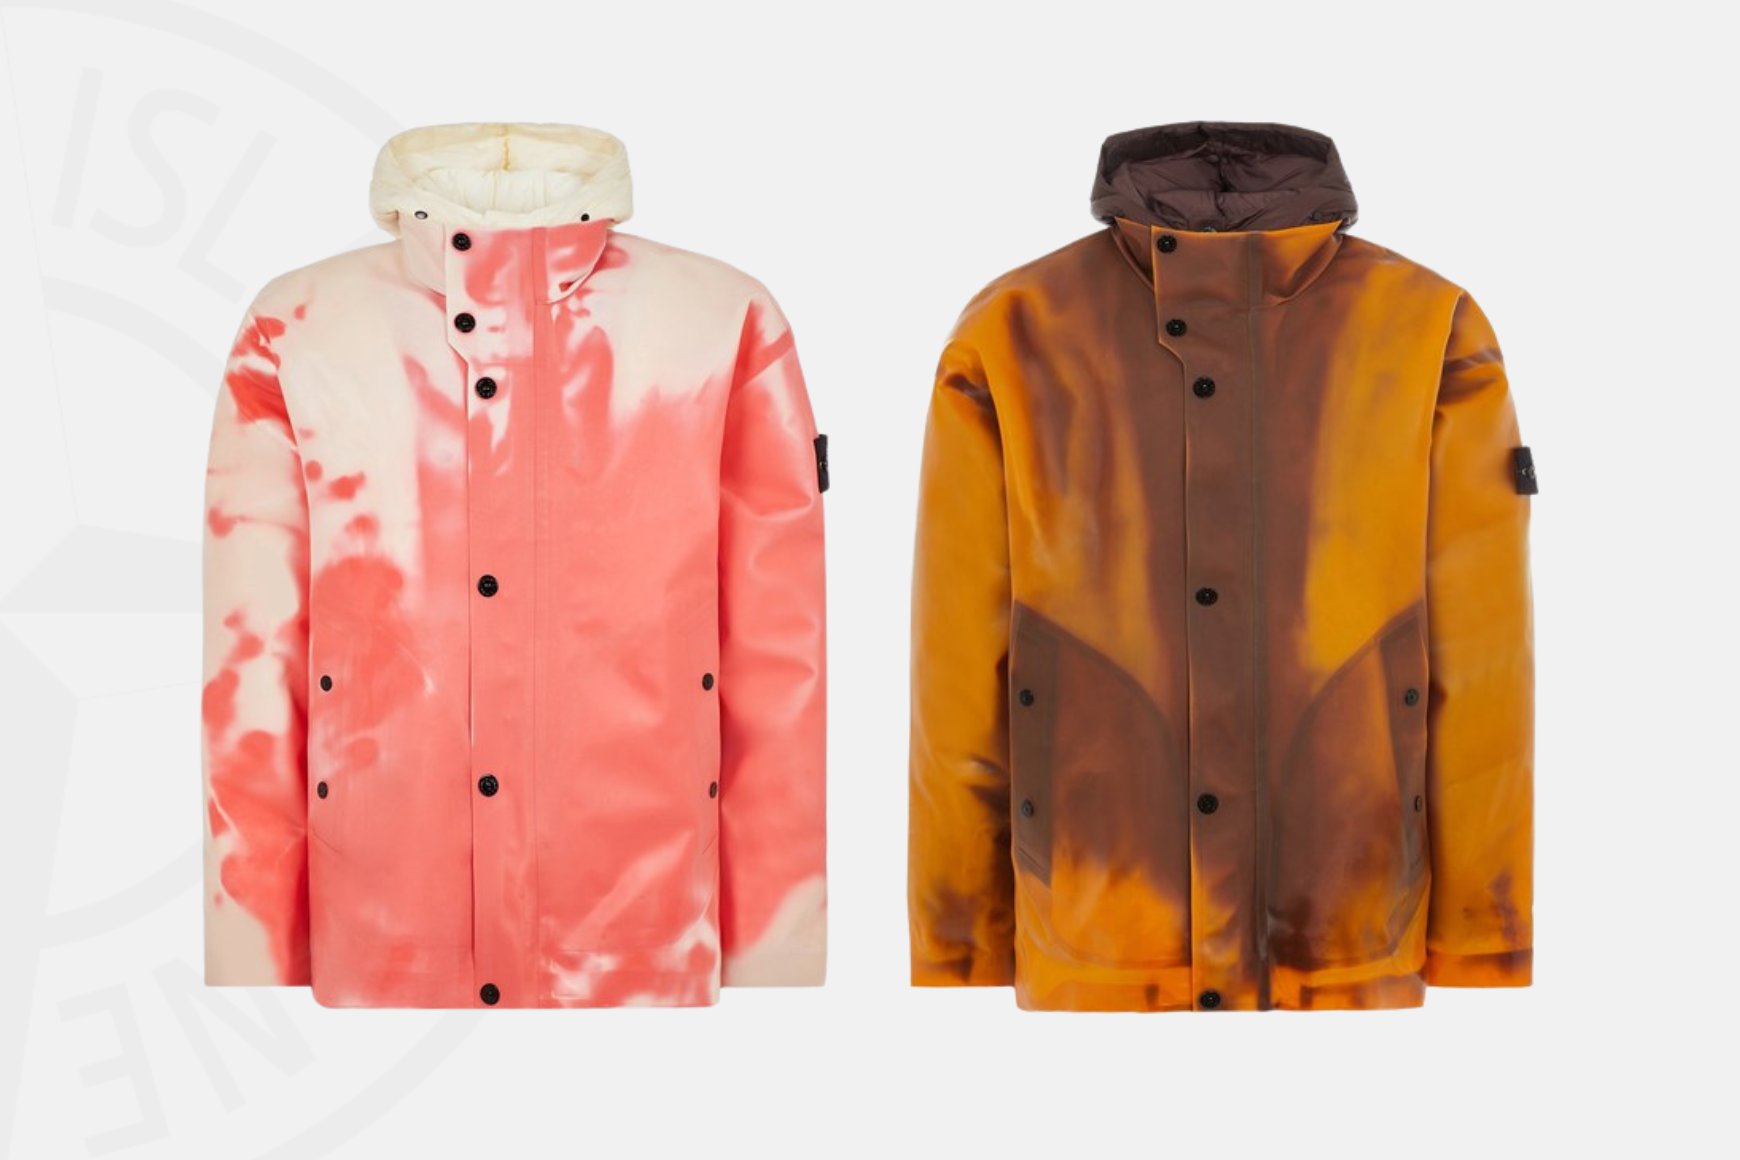 The latest Stone Island Ice Jackets from the AW23 collection. The left jacket is in the pink colourway, whilst the right jacket is in rust and orange.